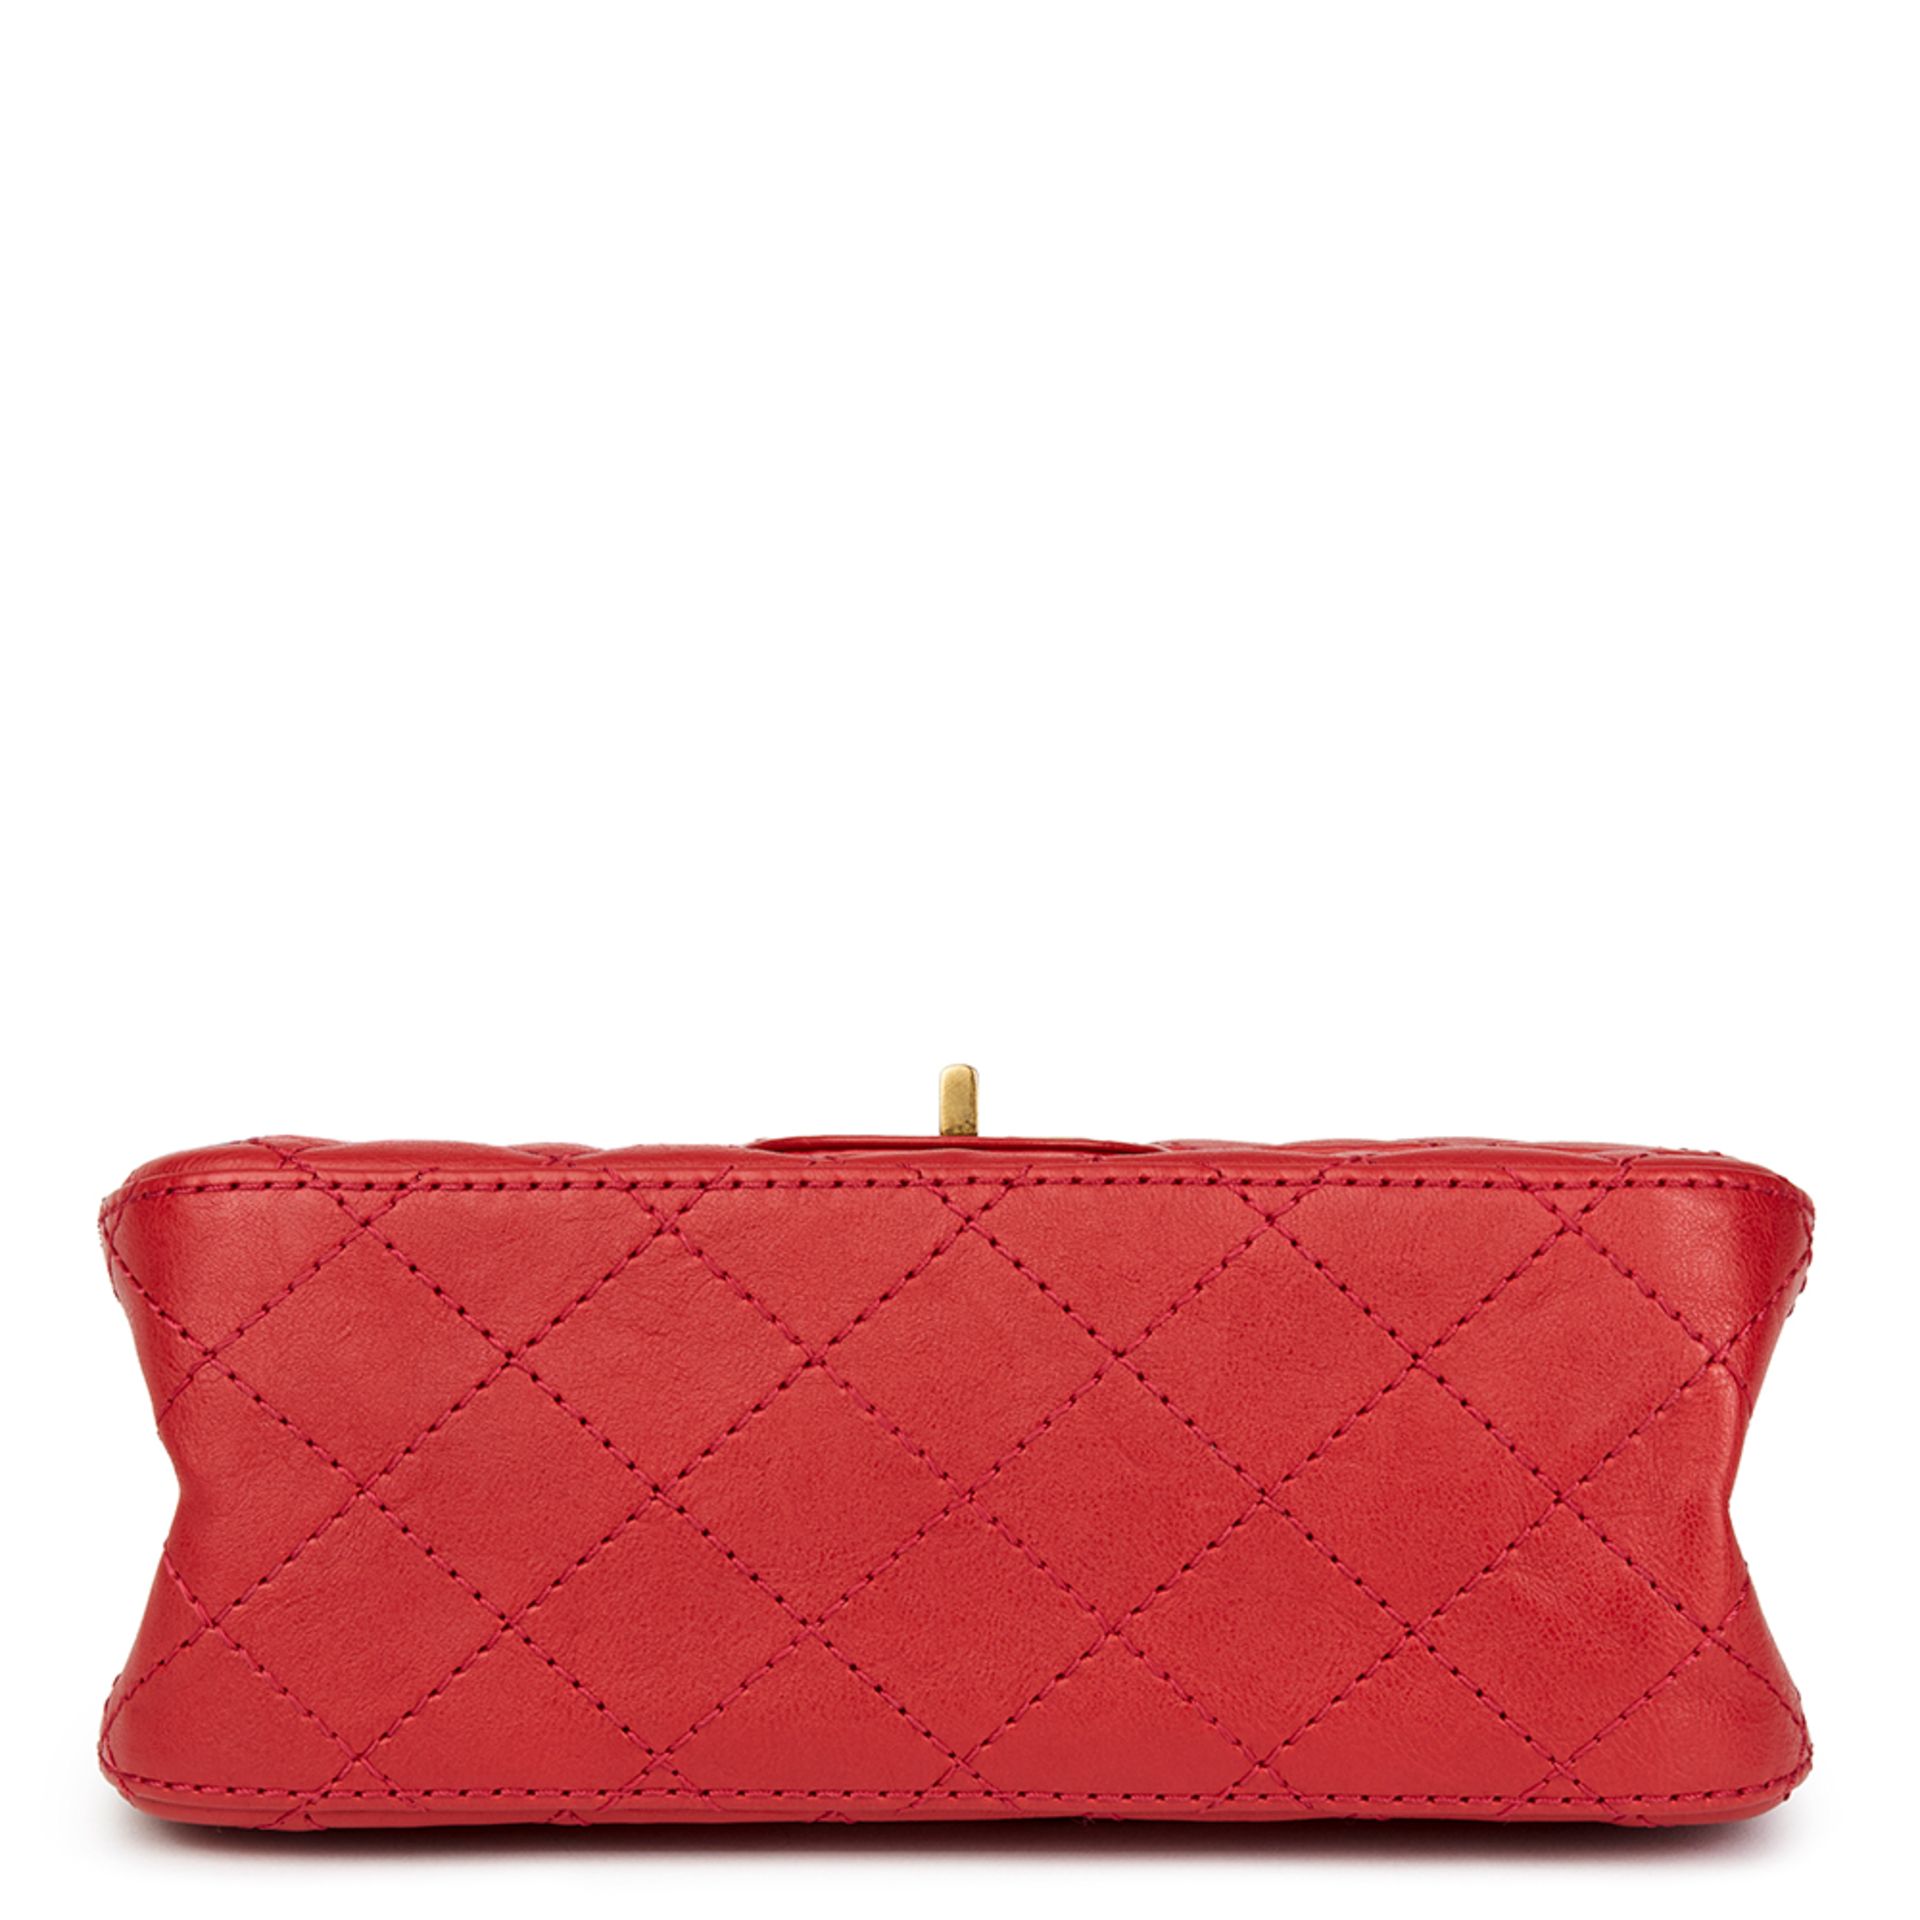 Chanel Red Quilted Calfskin Leather 2.55 Reissue 224 Double Flap Bag - Image 5 of 10